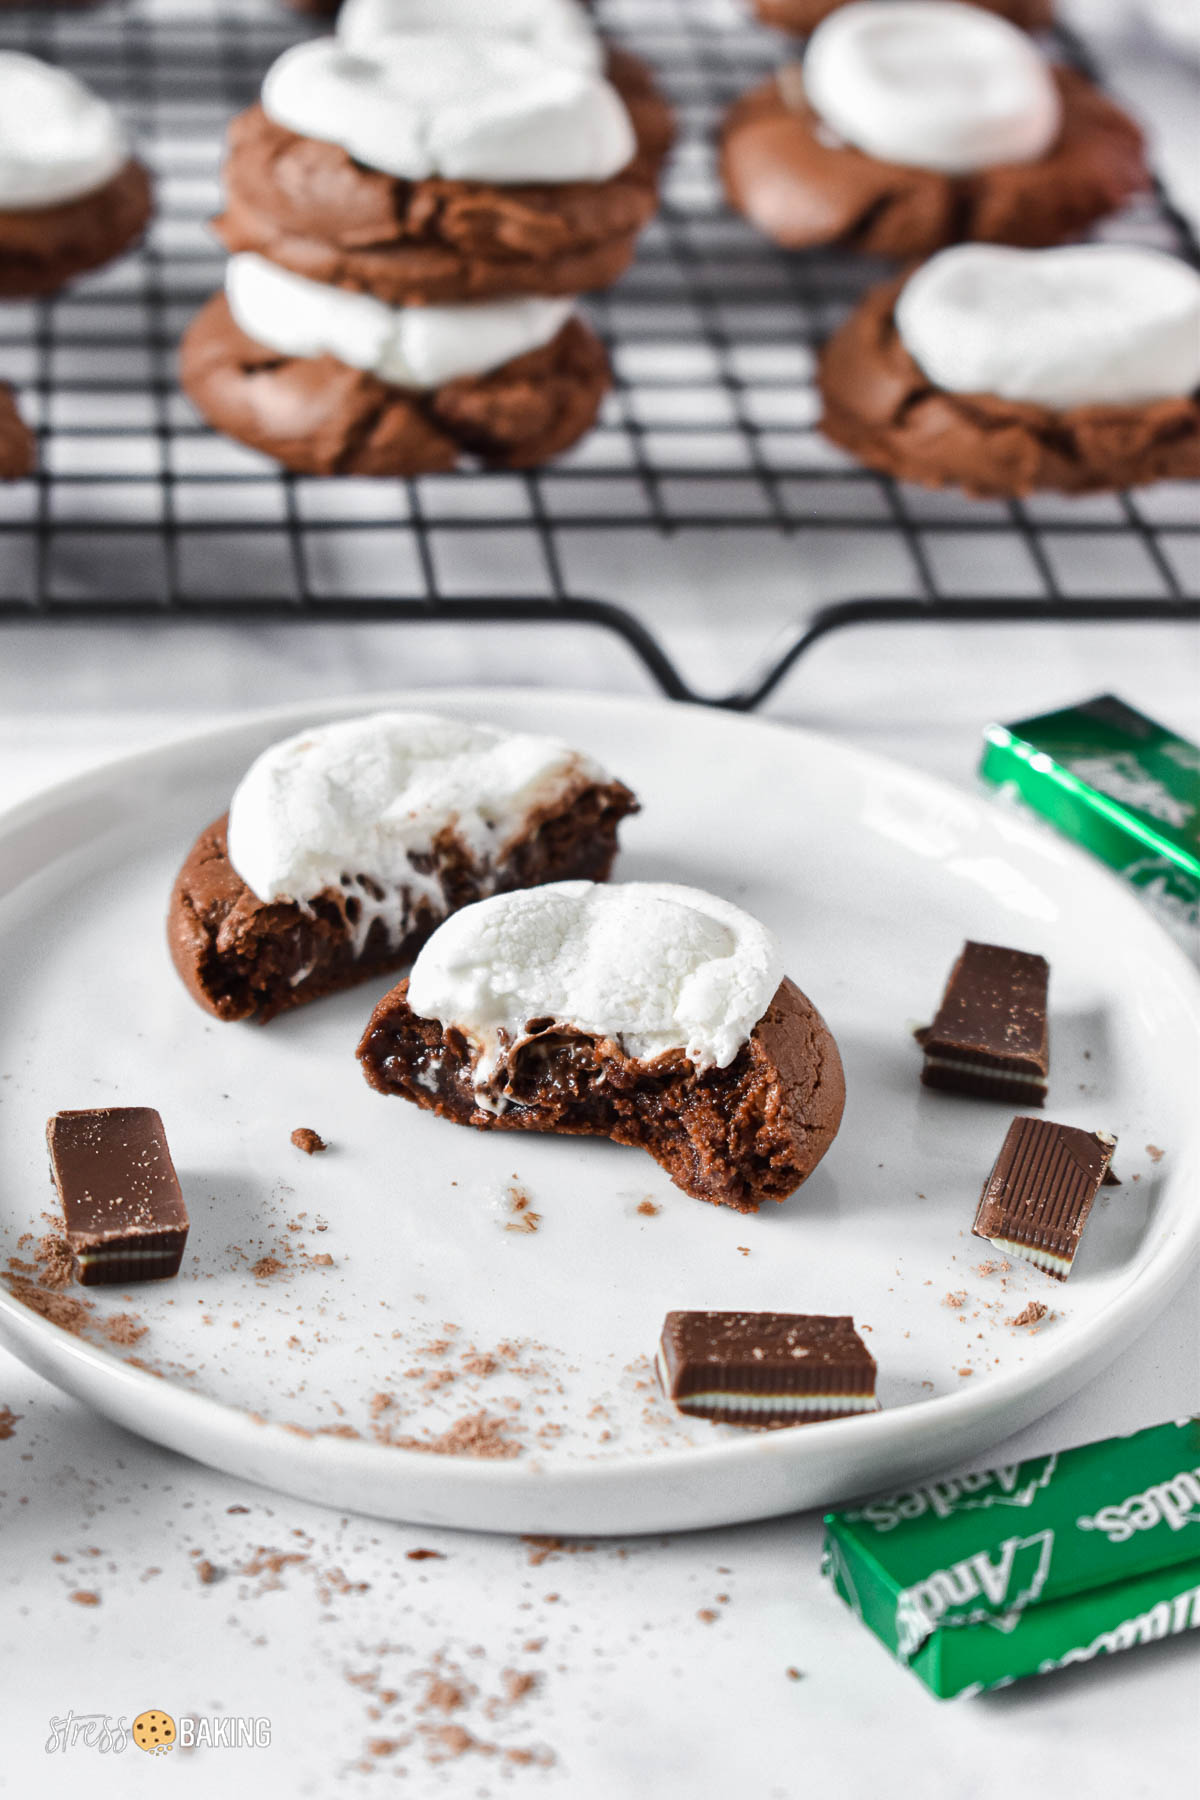 Hot cocoa cookie torn in half to show the gooey melted Andes mint and marshmallow